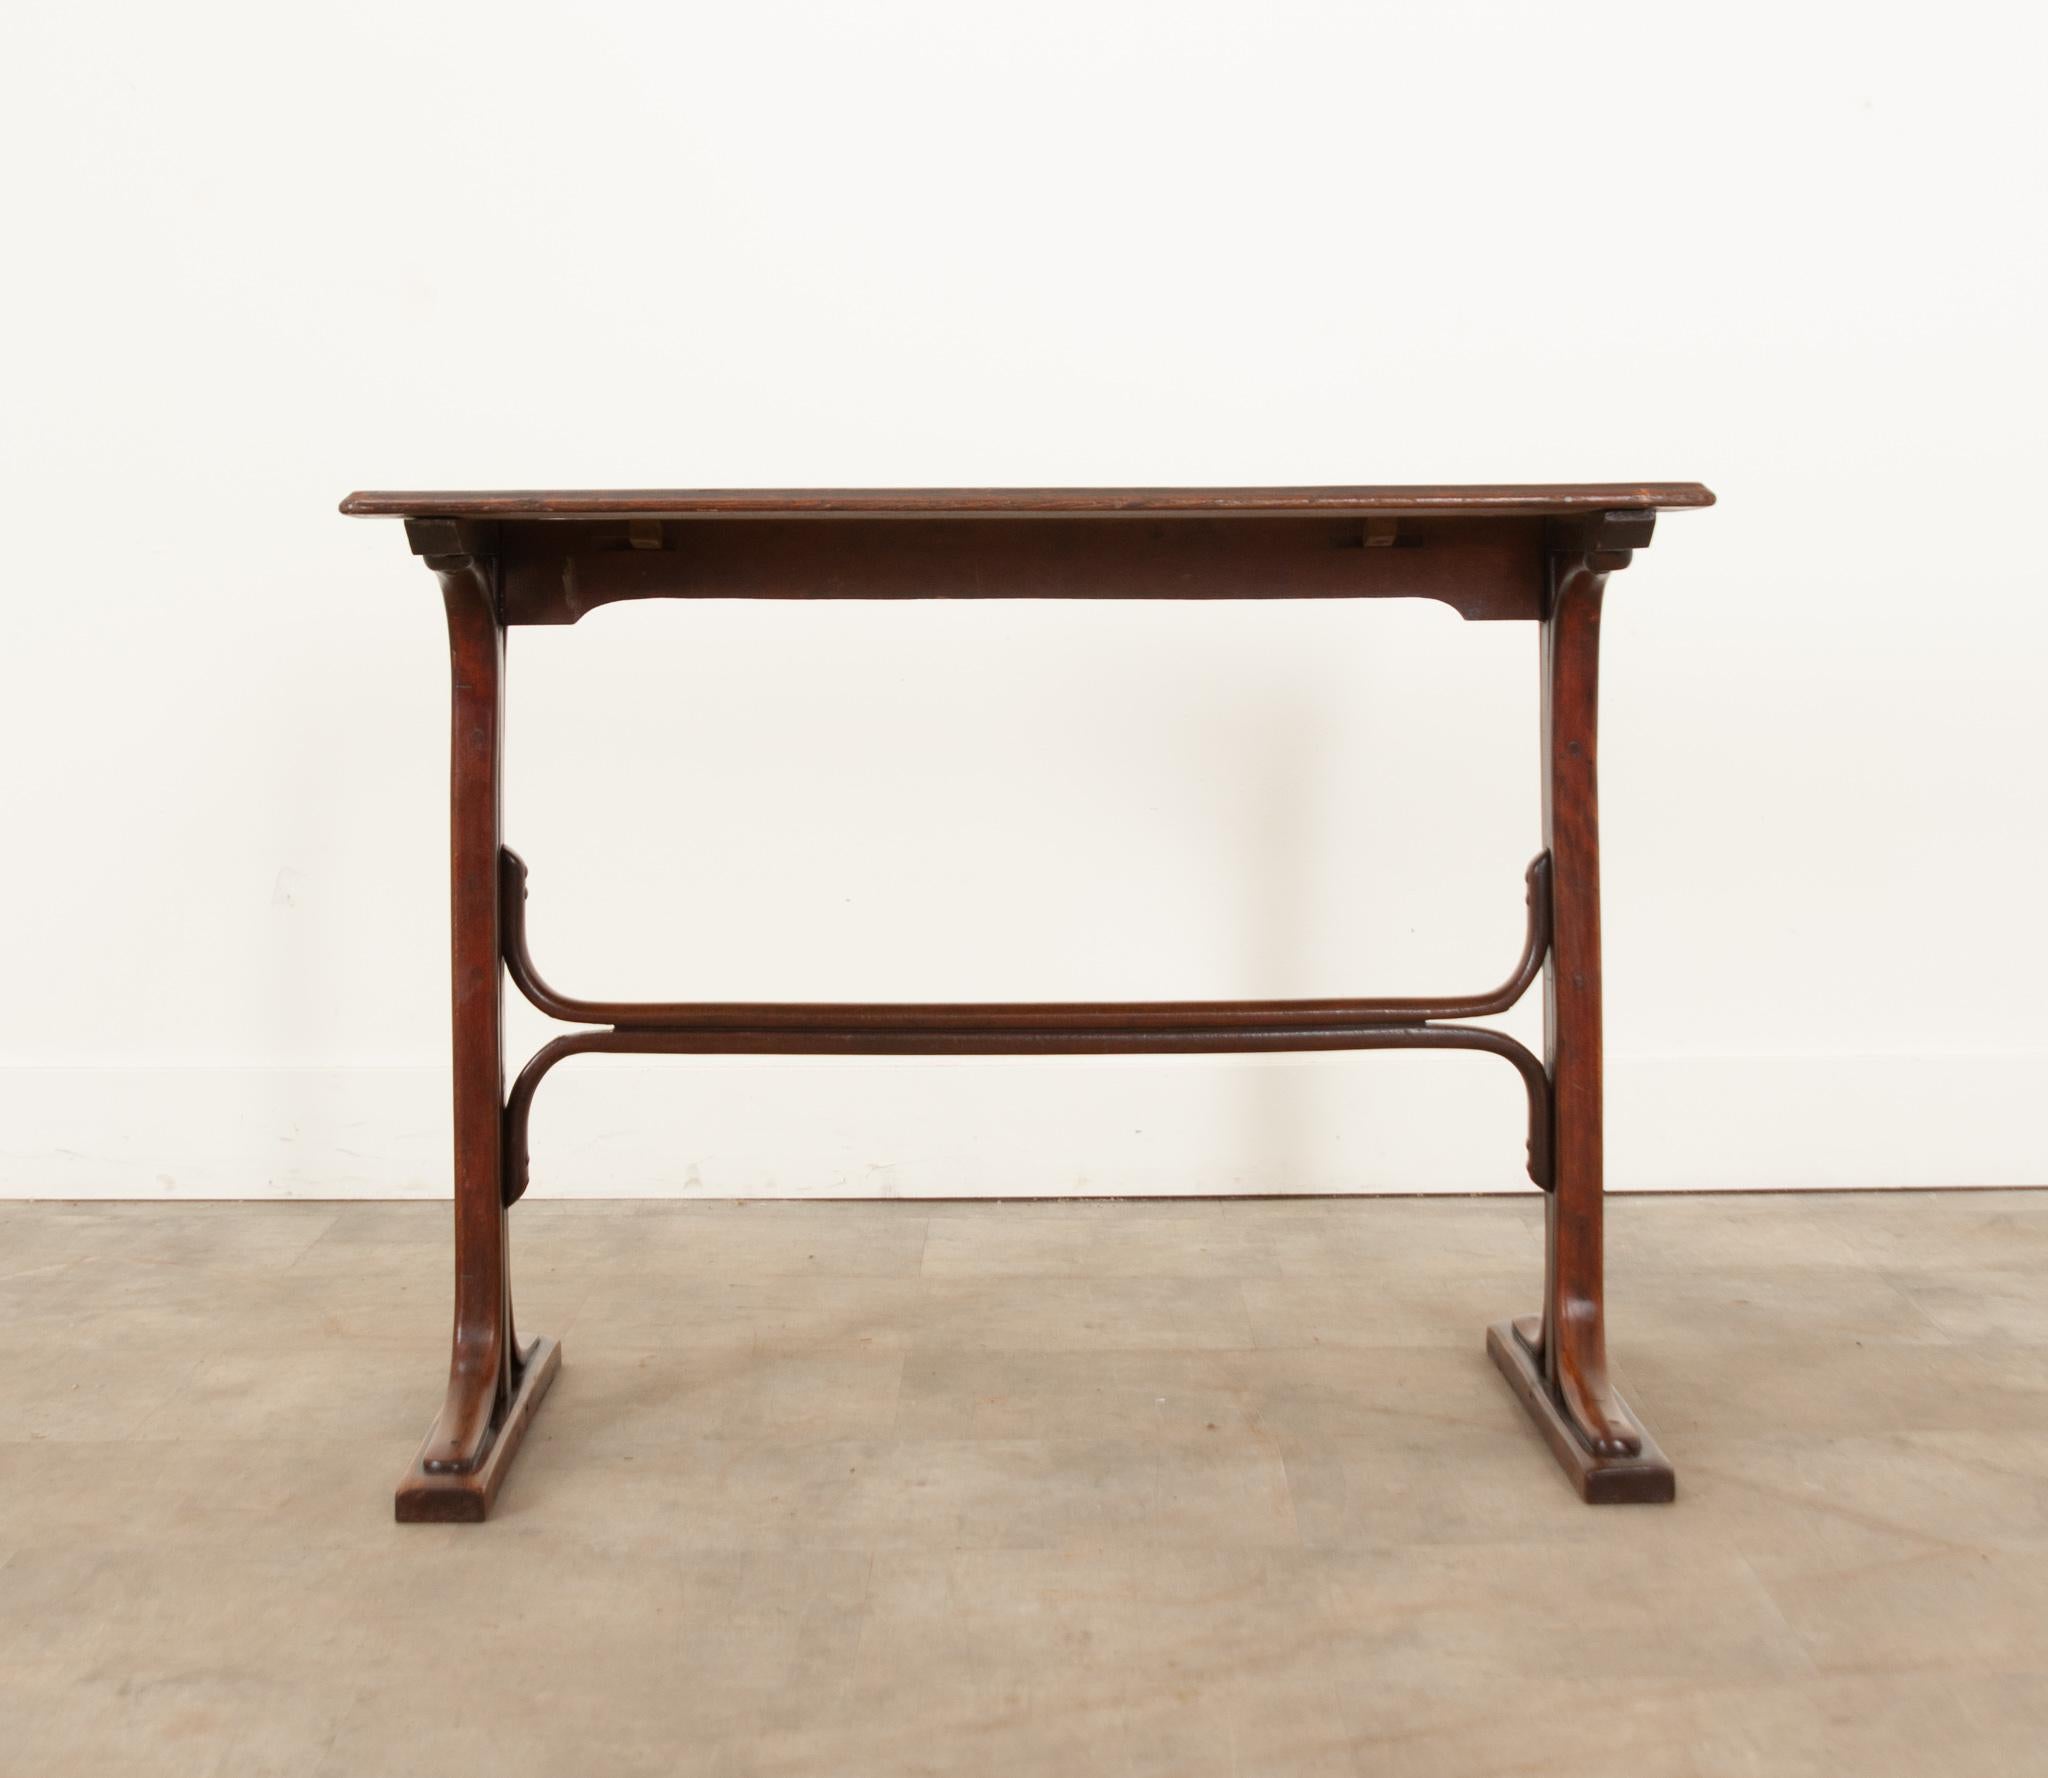 A charming French mahogany bistro table hand-crafted in France during the 19th century. Made entirely of smooth, rich mahogany wood and featuring a molded rectangular top set upon a trestle base with a curved double stretcher for additional support.